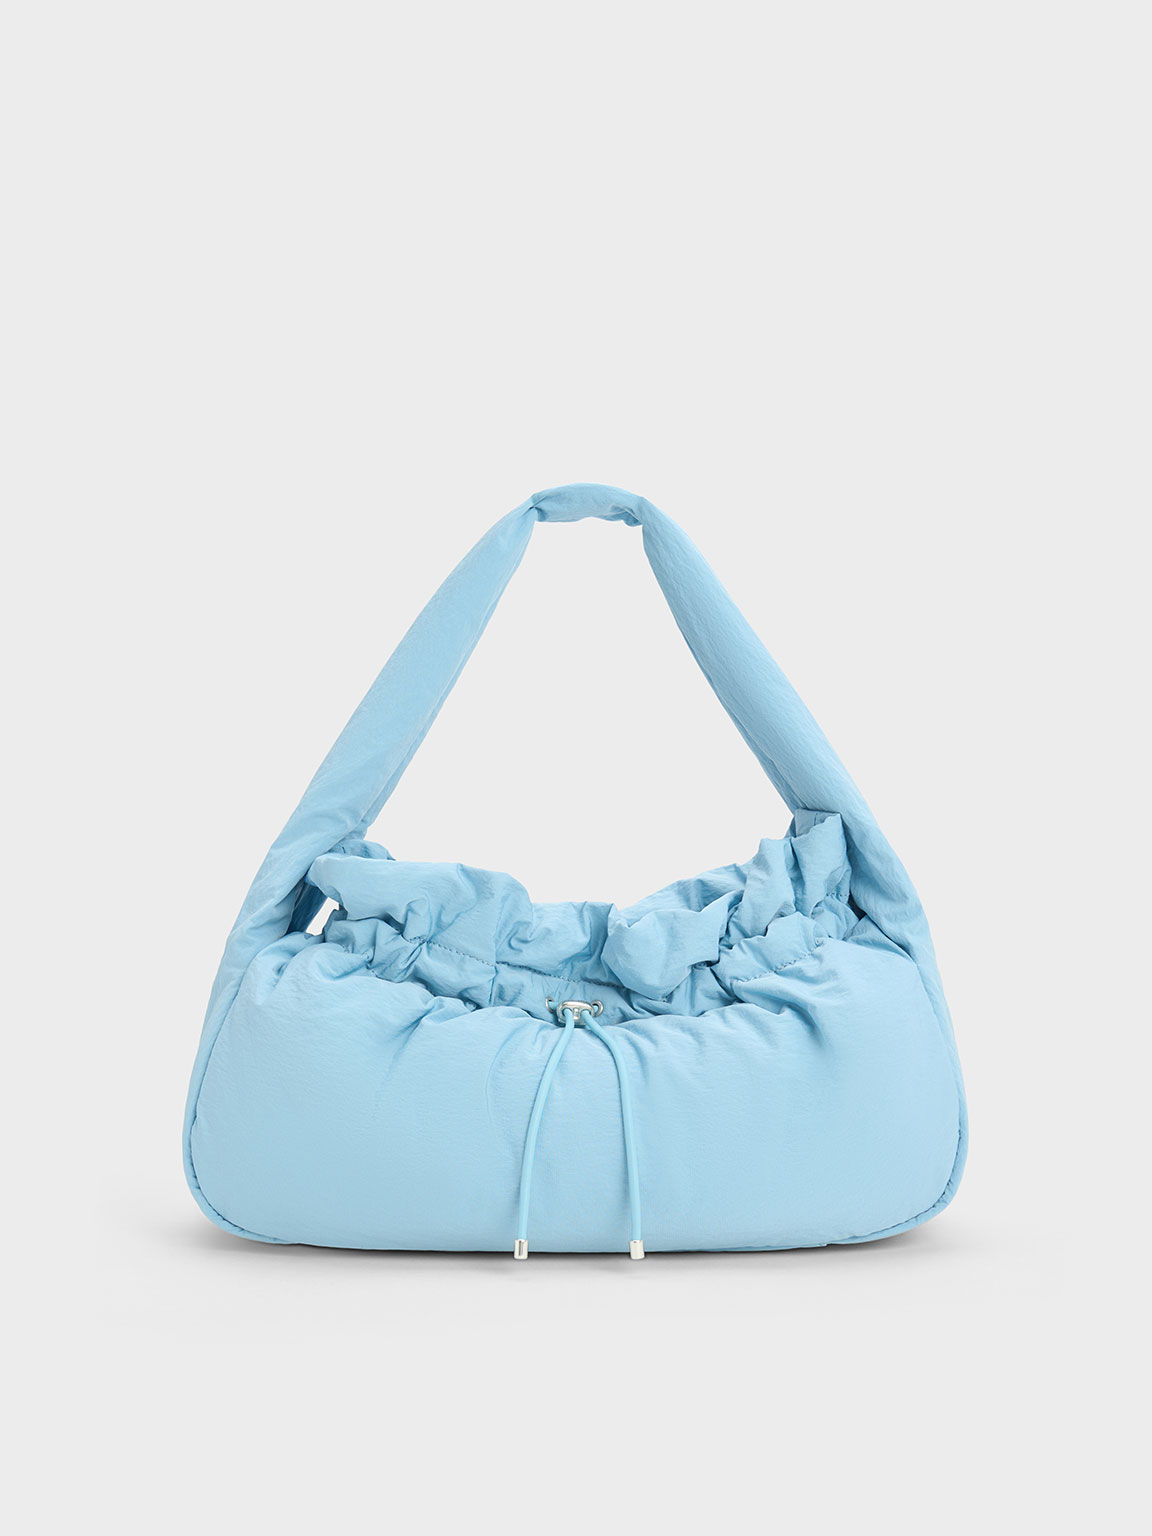 Coach light blue pleated leather shoulder bag (used)